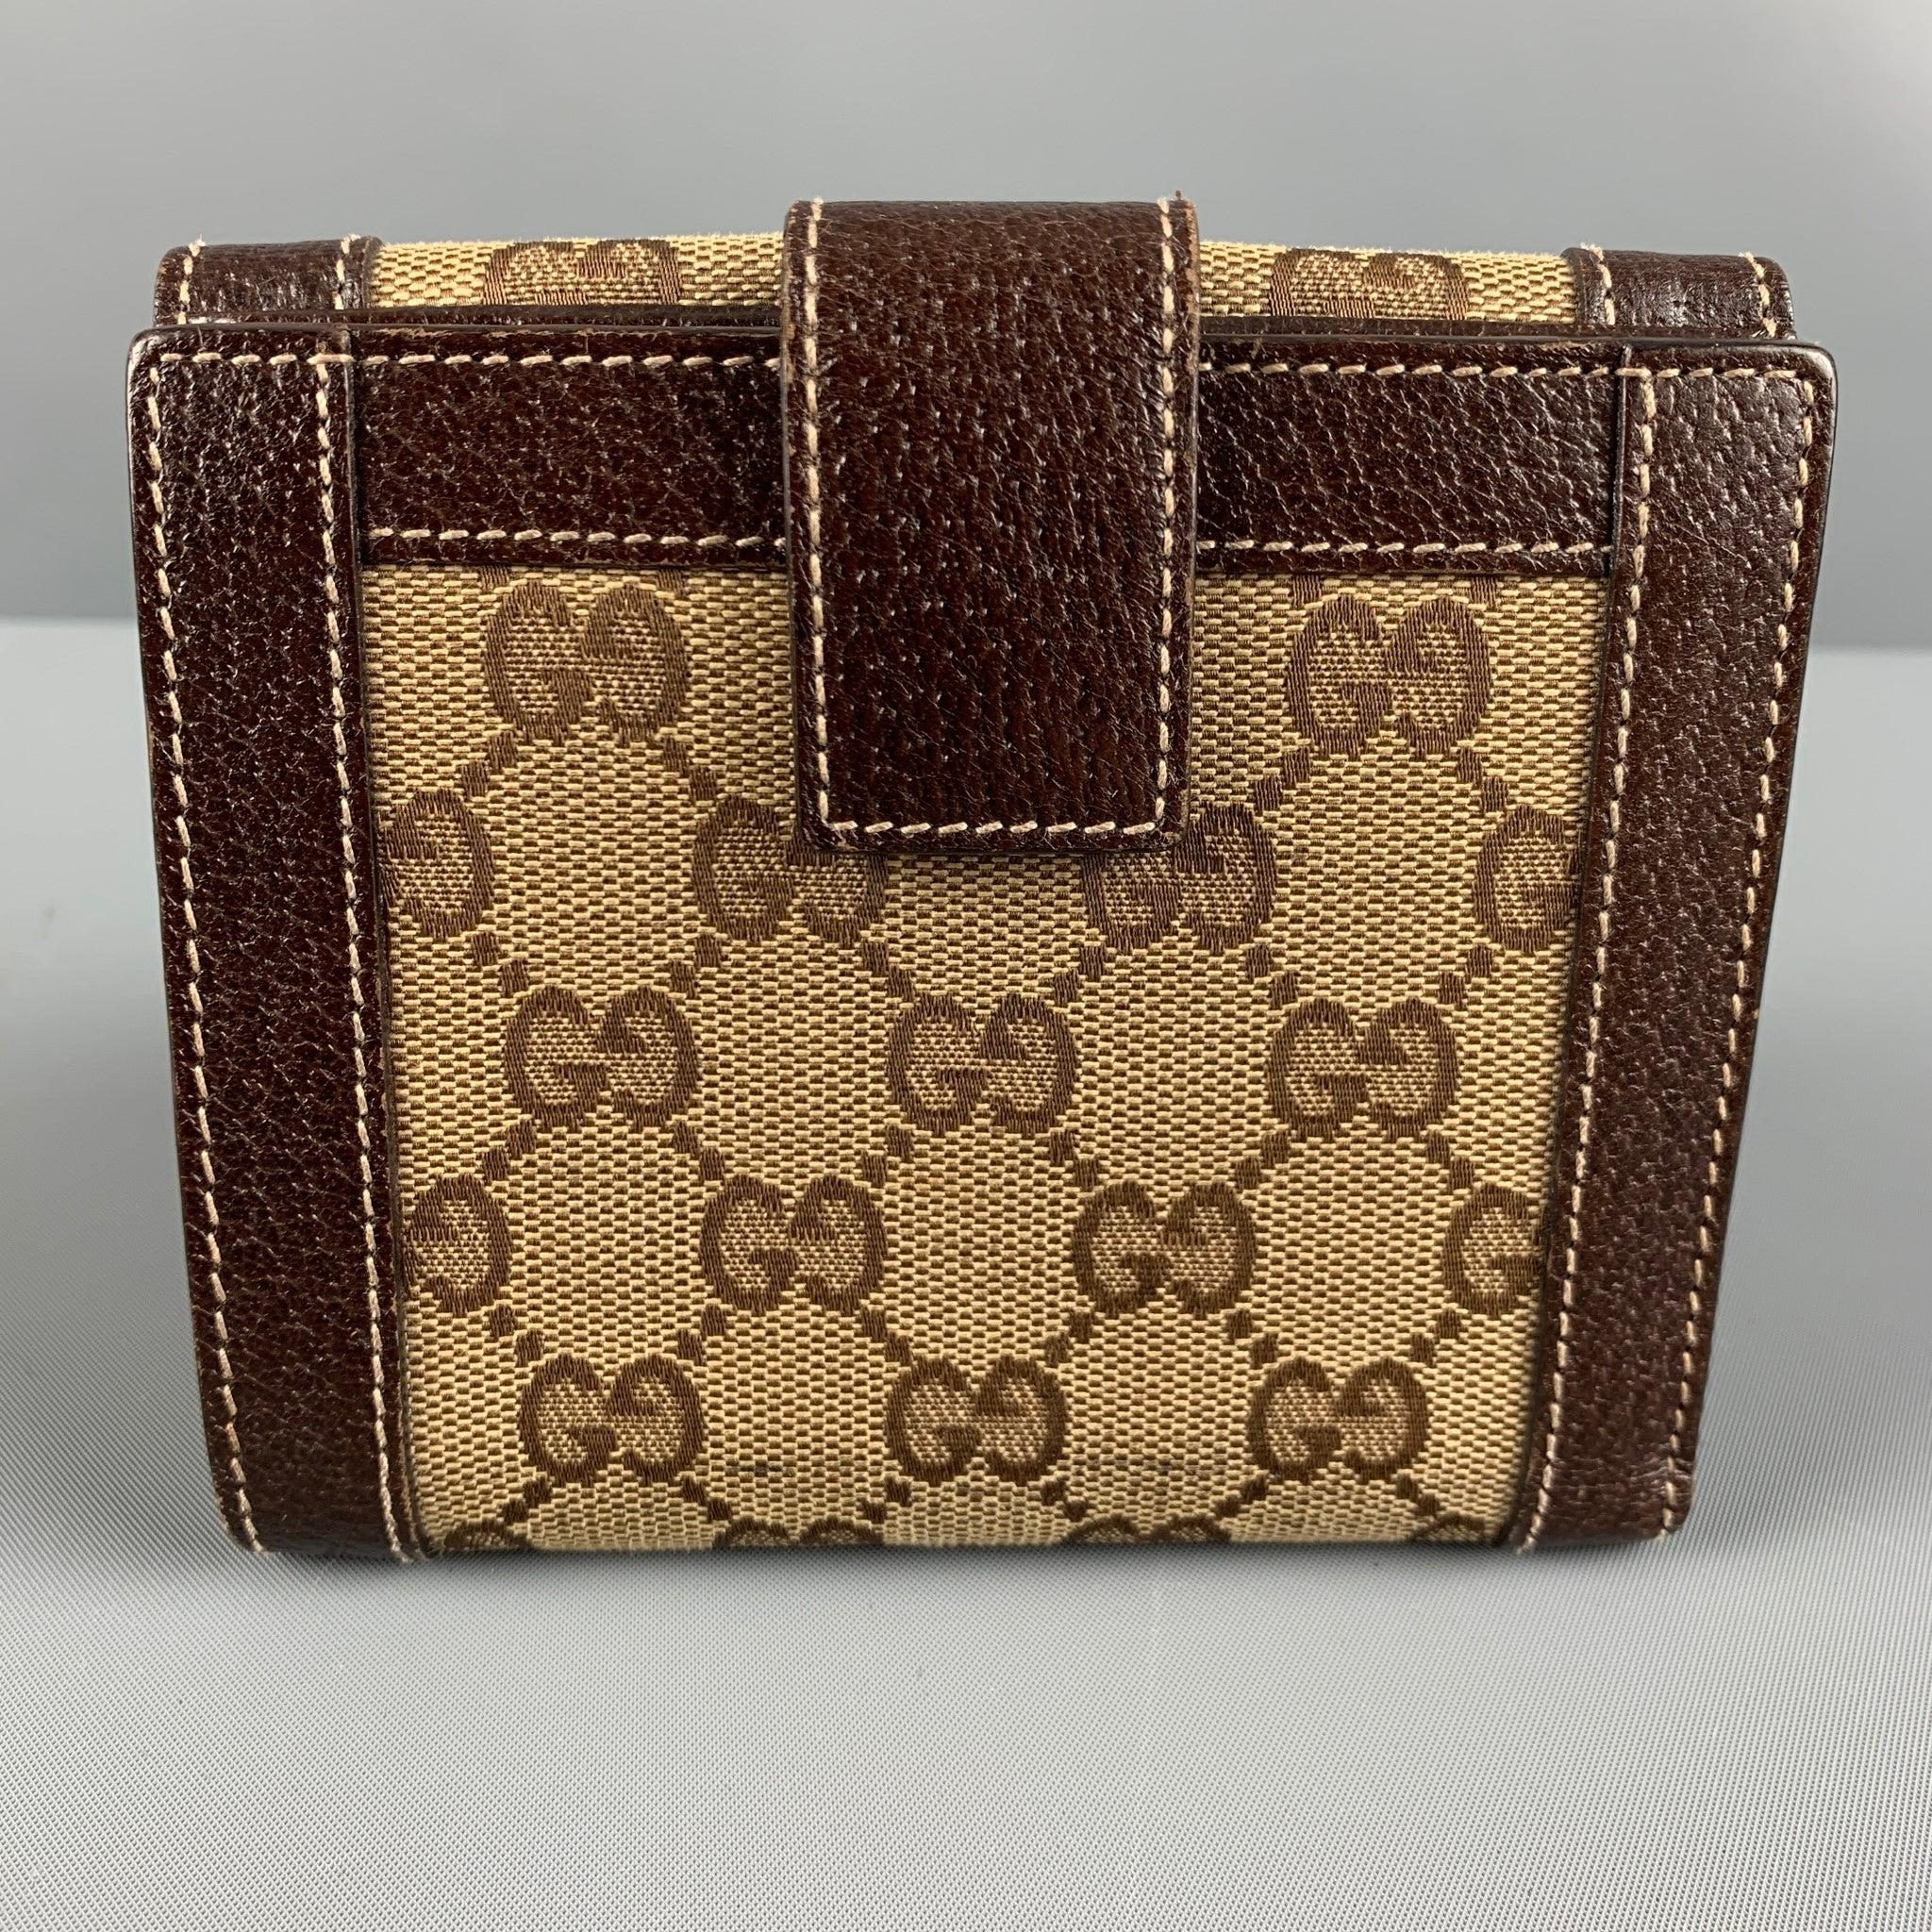 GUCCI VINTAGE wallet comes in a brown and beige GG monogram leather featuring a flap coin pocket, inner slots and snap button closure. Made in Italy.Very Good Pre-Owned Condition. Minor Signs of Wear. 

Measurements: 
  Length: 5 inches Height: 4.5